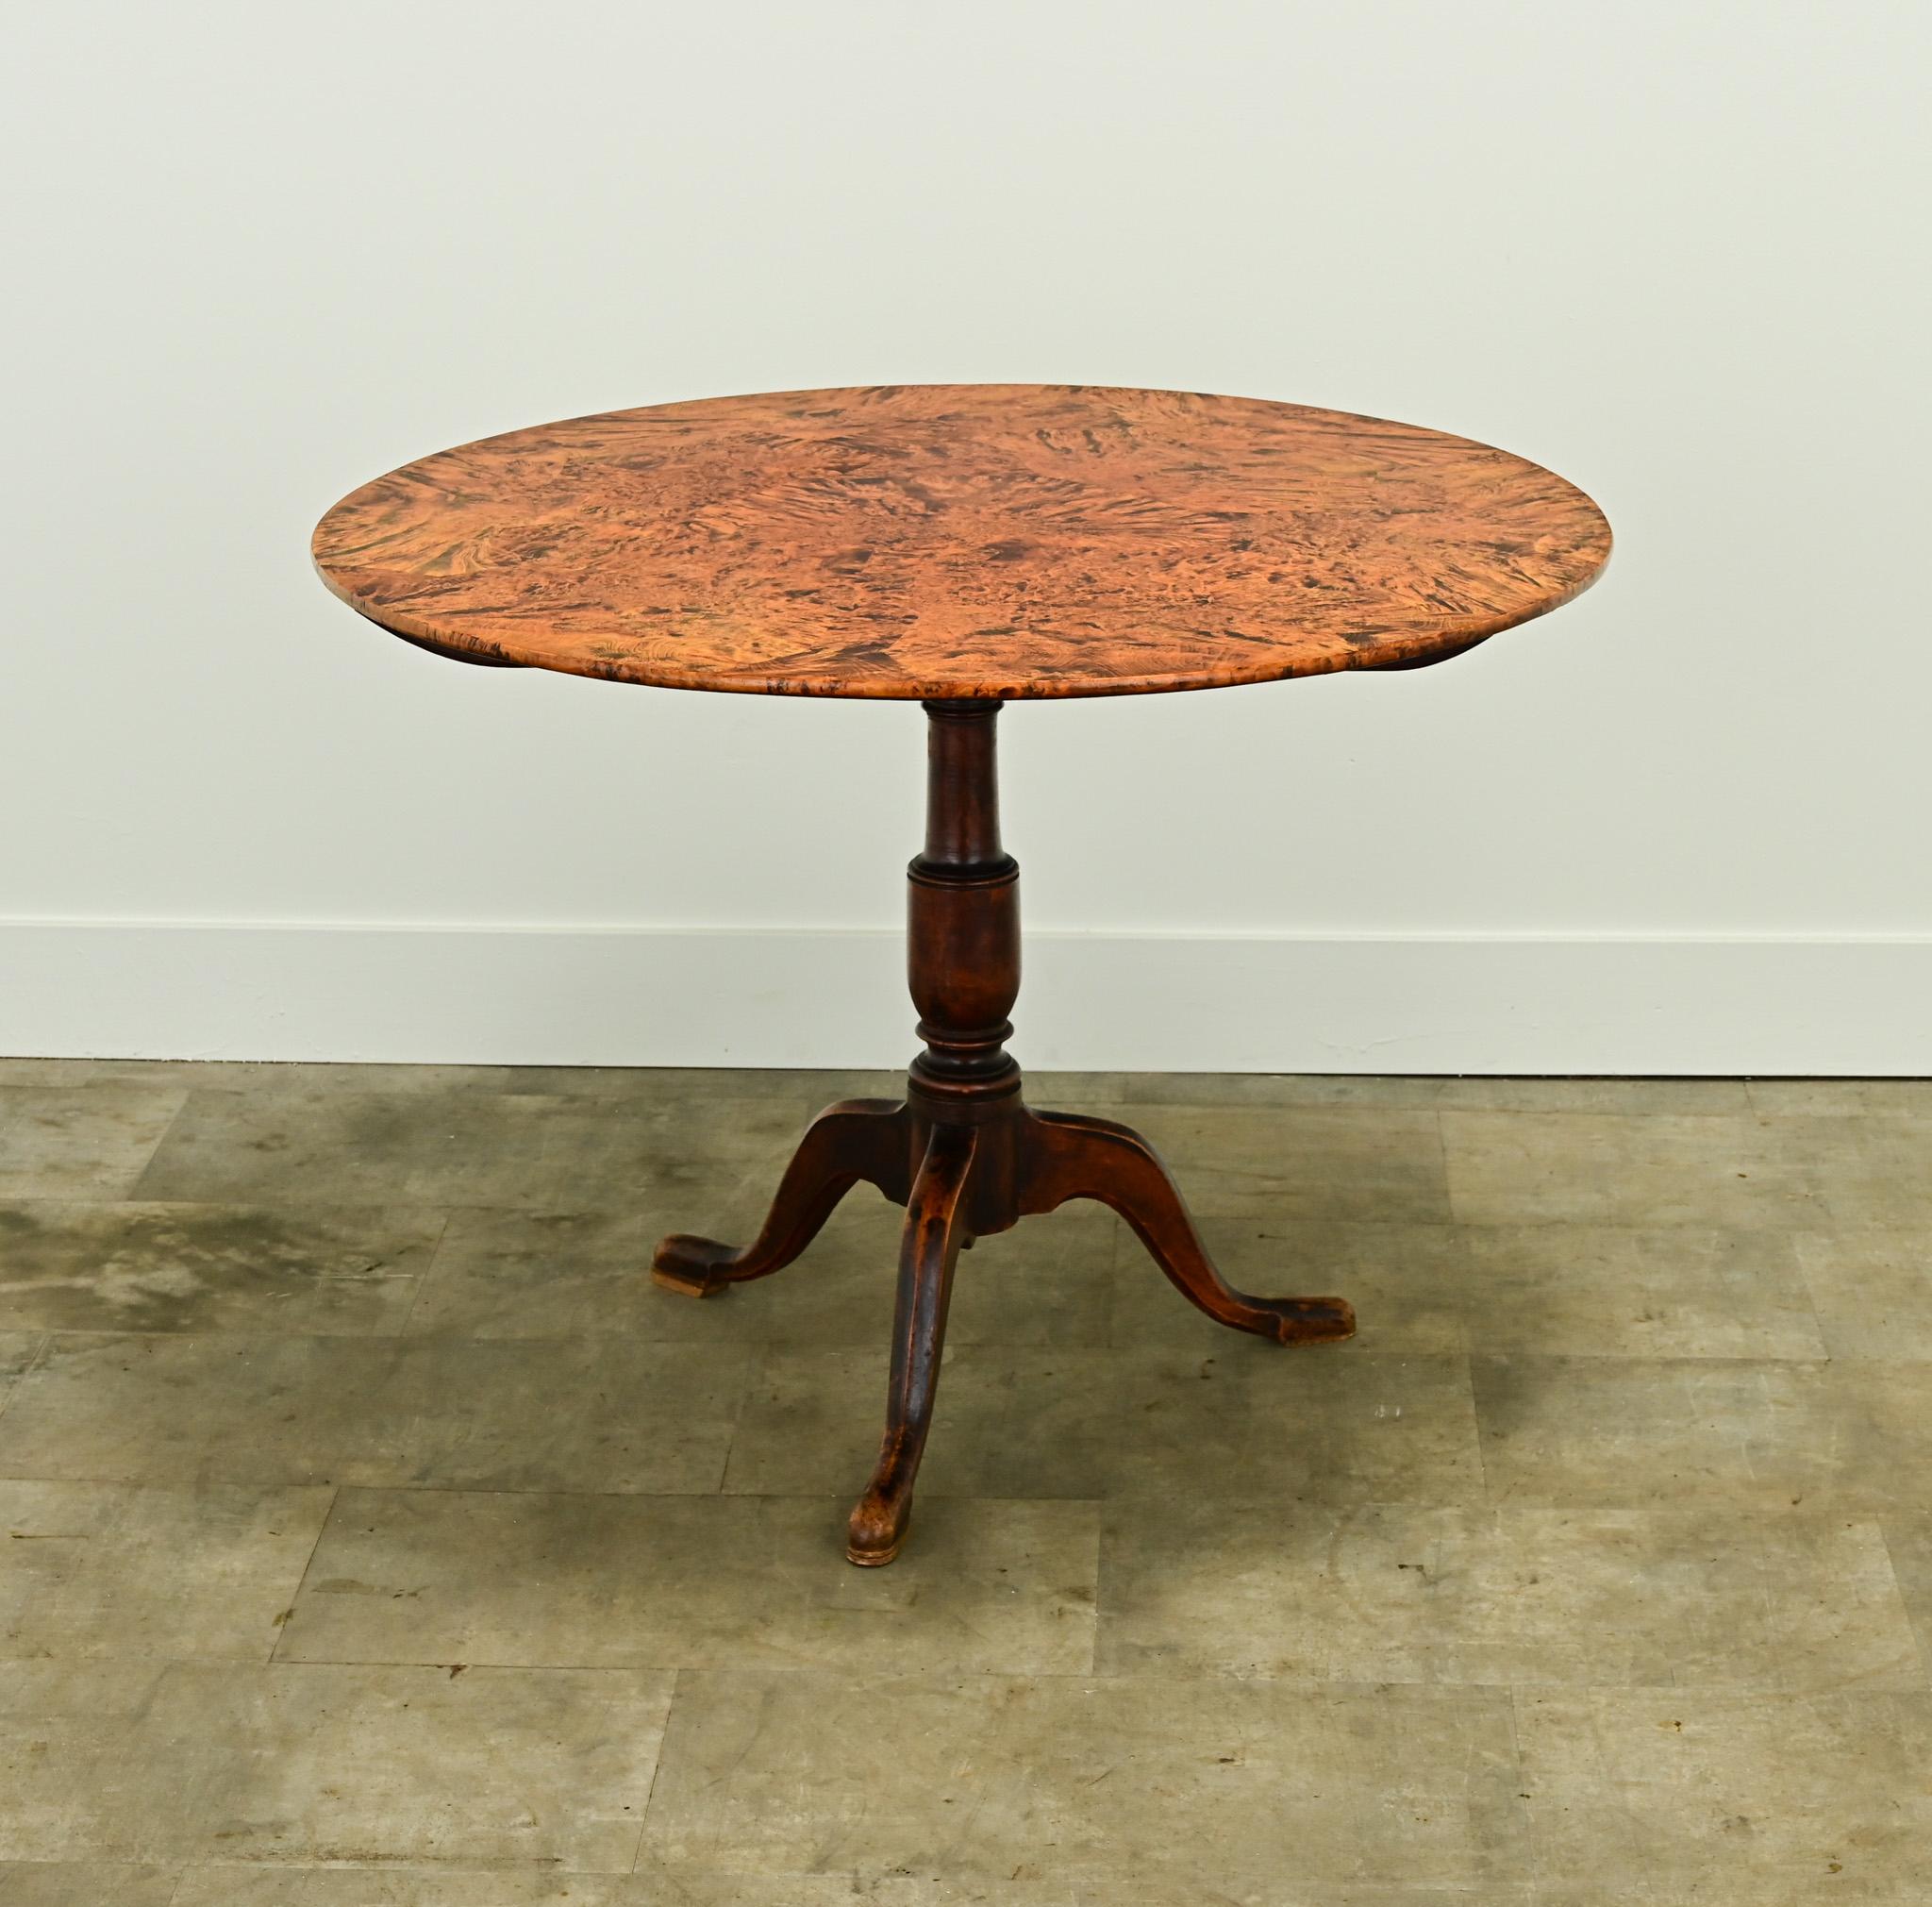 A Swedish tilt-top round table made in the 1800’s. The top is made from wonderfully colored birch with handsome grain patterns. The tilt-top latch is metal and easy to use resting over a pedestal base with three splayed legs. Cleaned and polished